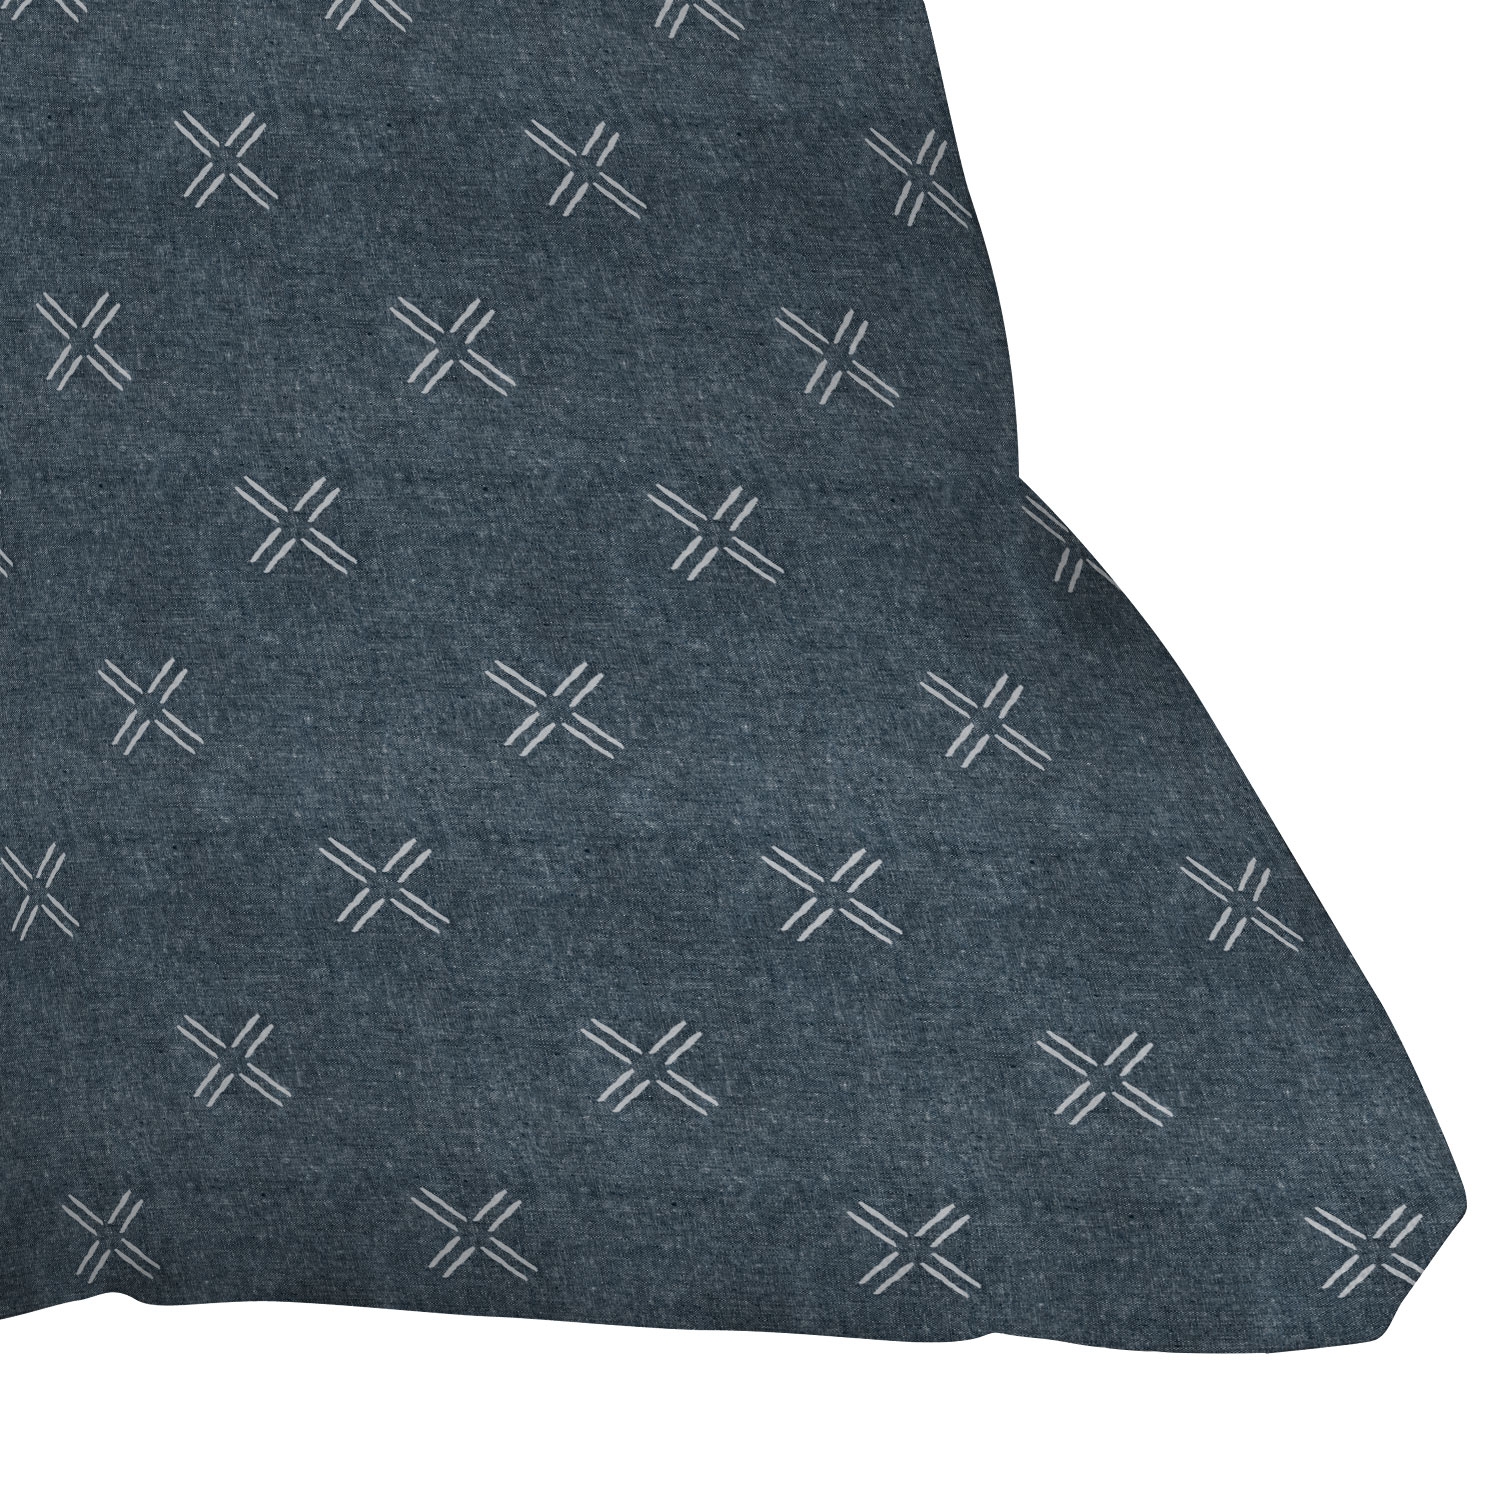 Mud Cloth Cross Navy by Little Arrow Design Co - Outdoor Throw Pillow 18" x 18" - Image 2